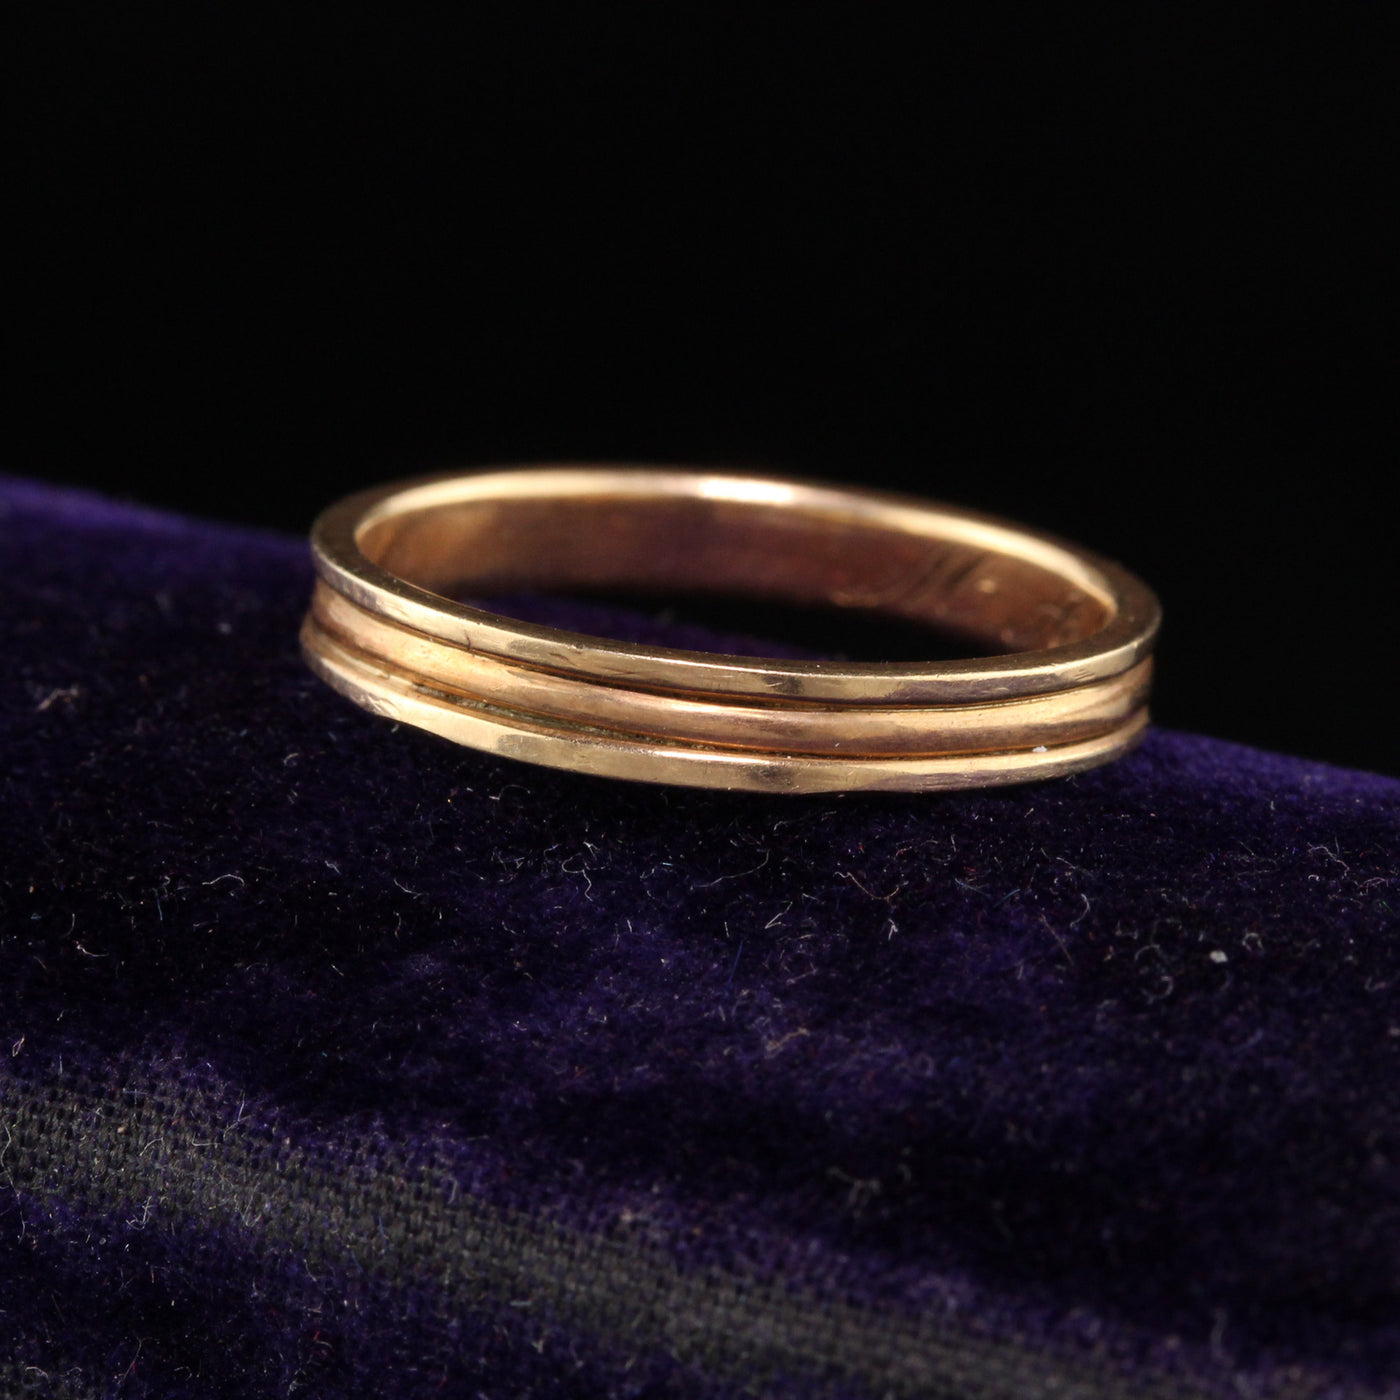 RESERVED - Layaway 2 of 5 - Antique Victorian 14K Yellow Gold Engraved Wedding Band - Size 6